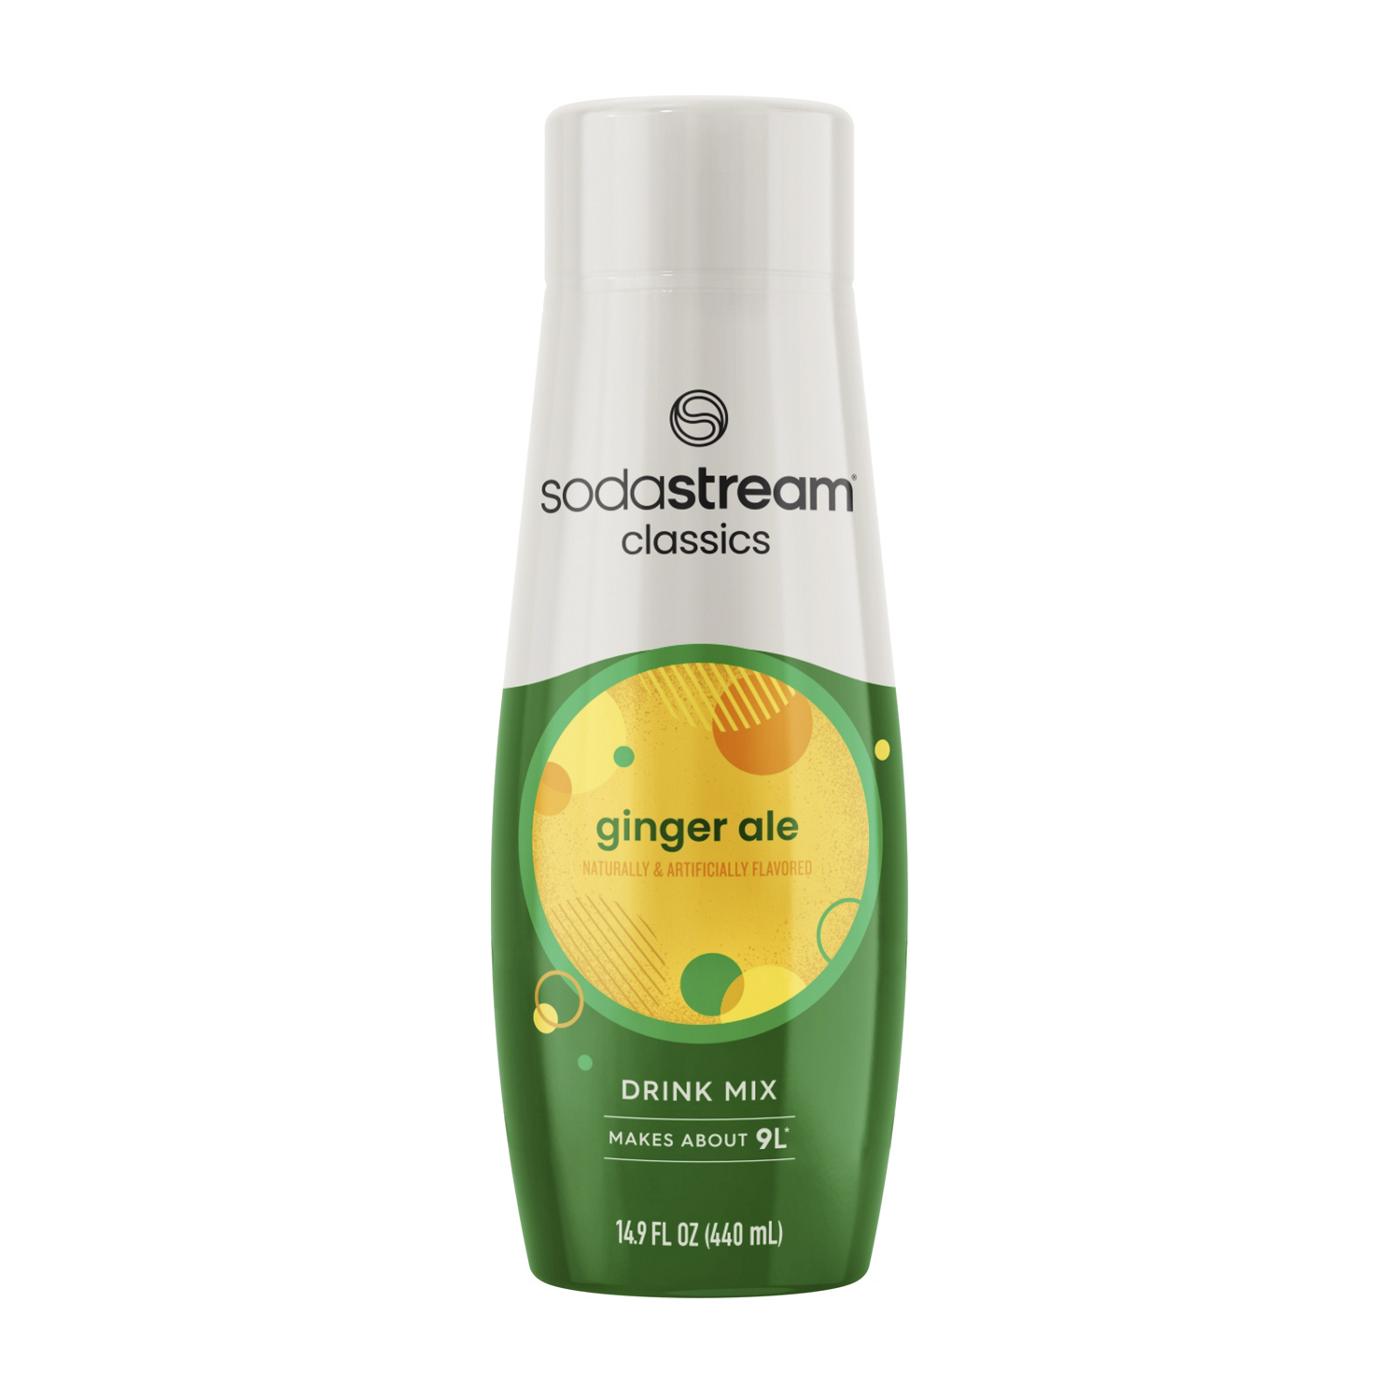 SodaStream Ginger Ale Drink Mix; image 1 of 2